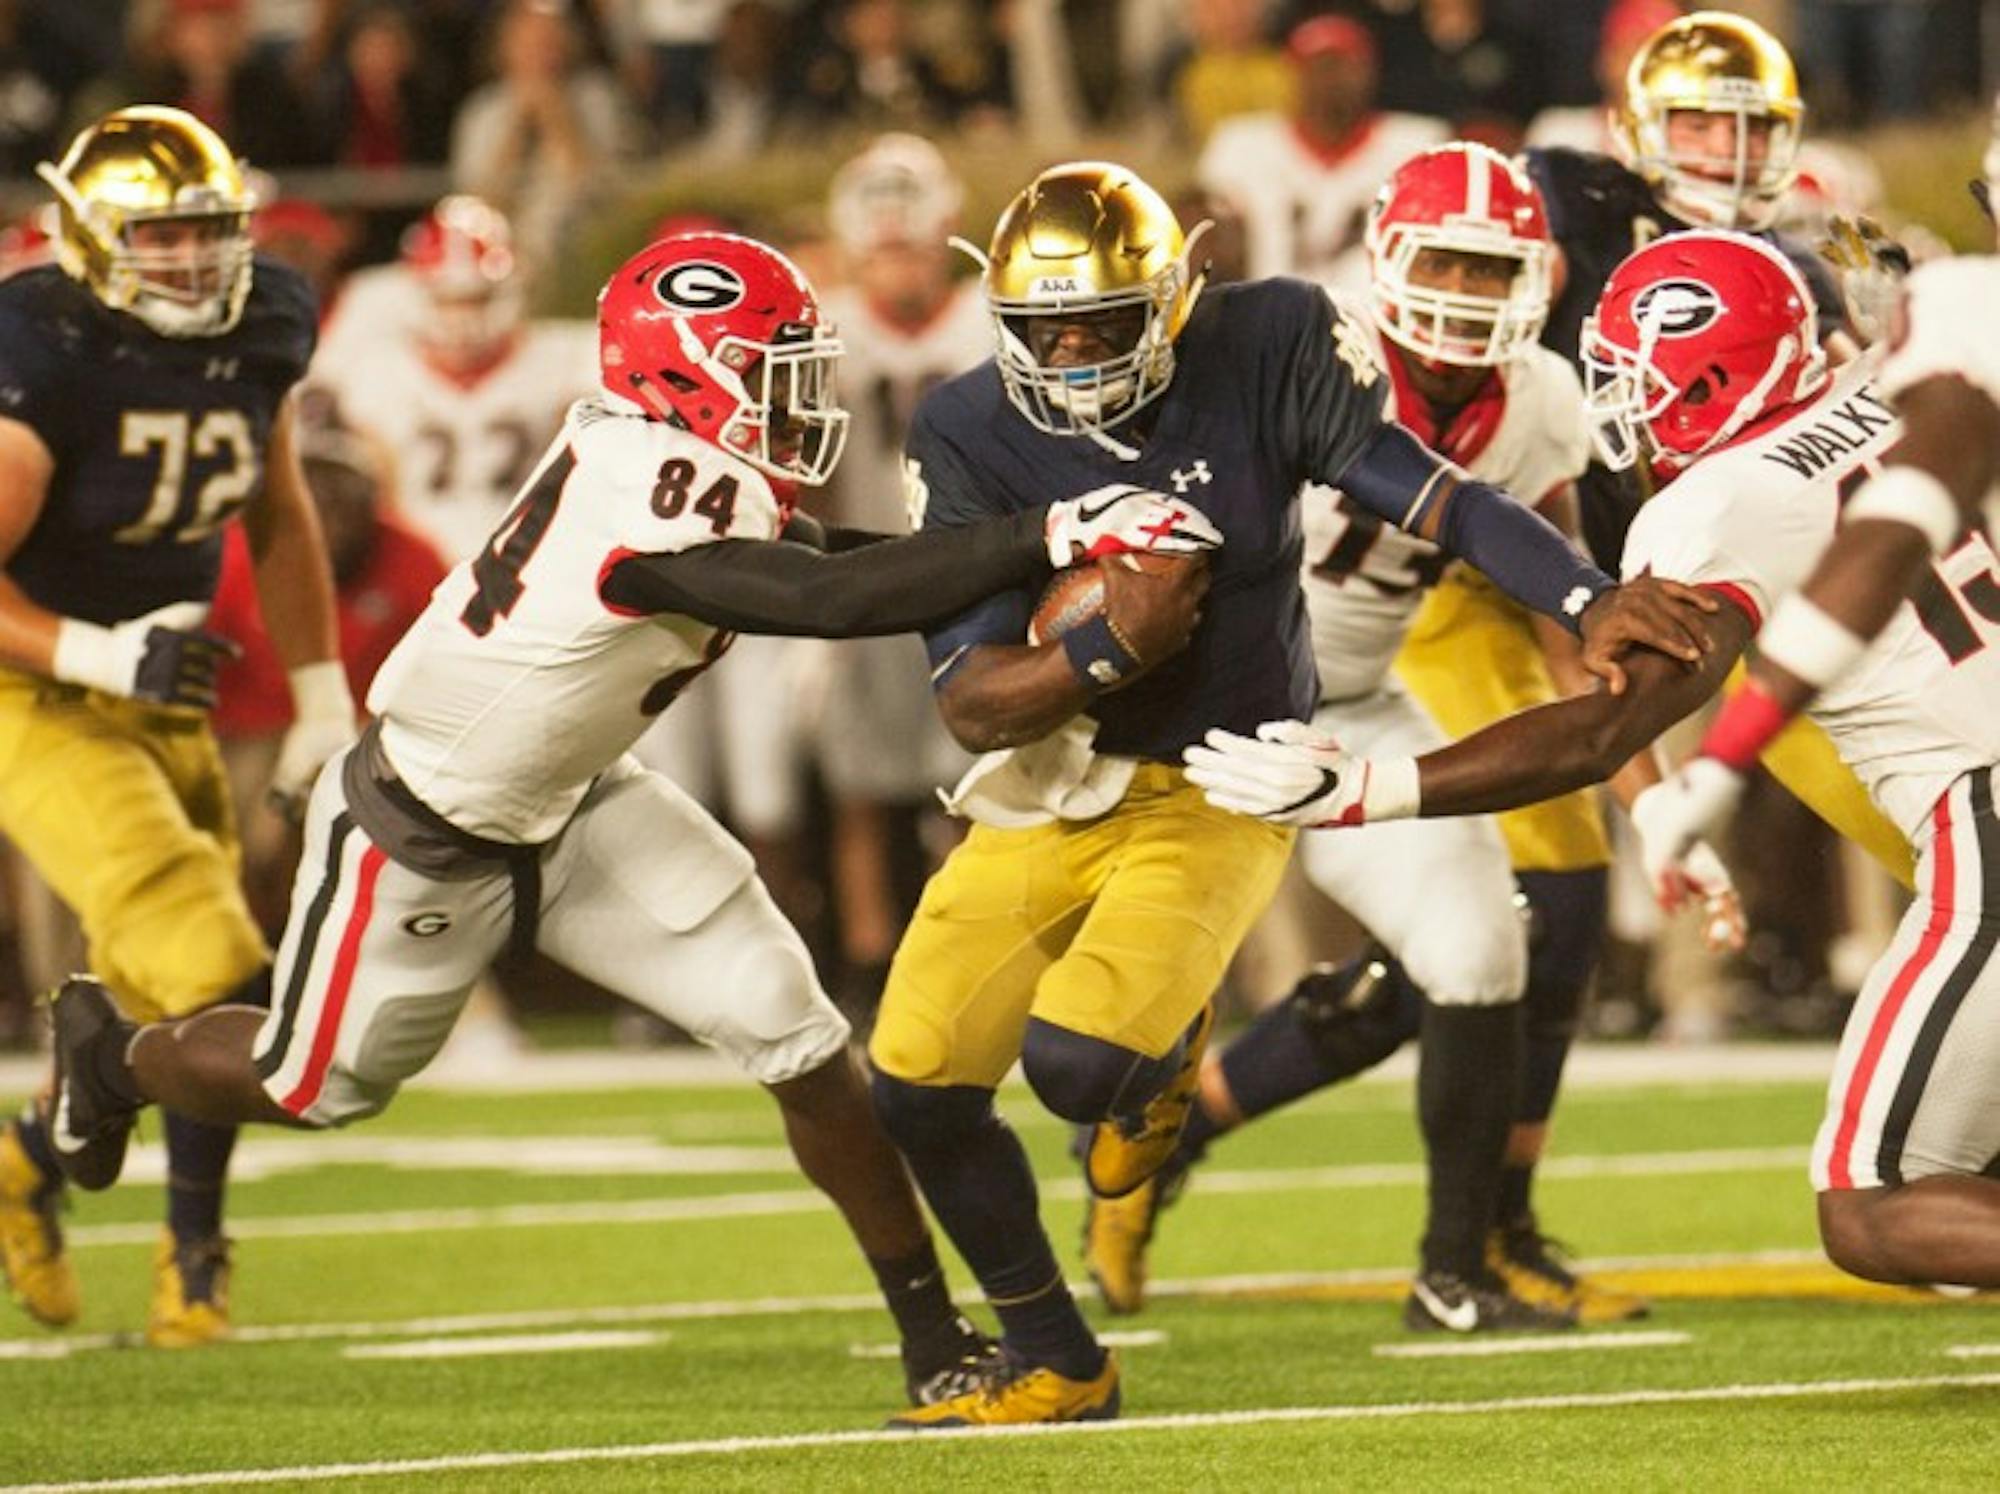 Irish junior quarterback Brandon Wimbush tries to fight his way through two Georgia defenders during Notre Dame's 20-19 loss to the Bulldogs on Saturday. Wimbush rushed 16 times for only one yard.